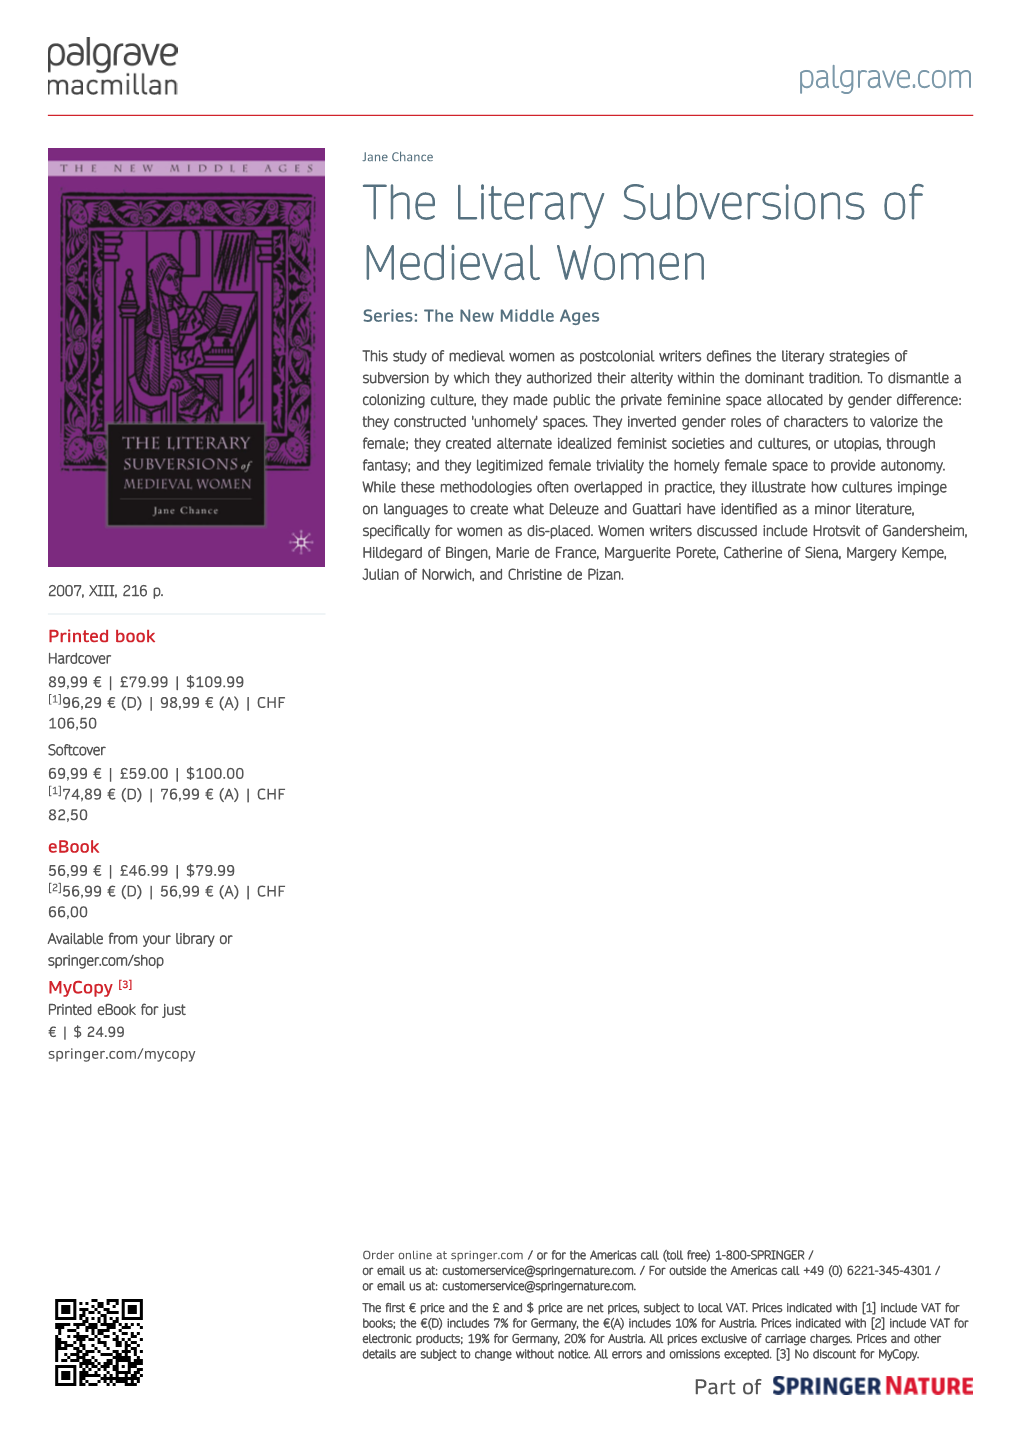 The Literary Subversions of Medieval Women Series: the New Middle Ages